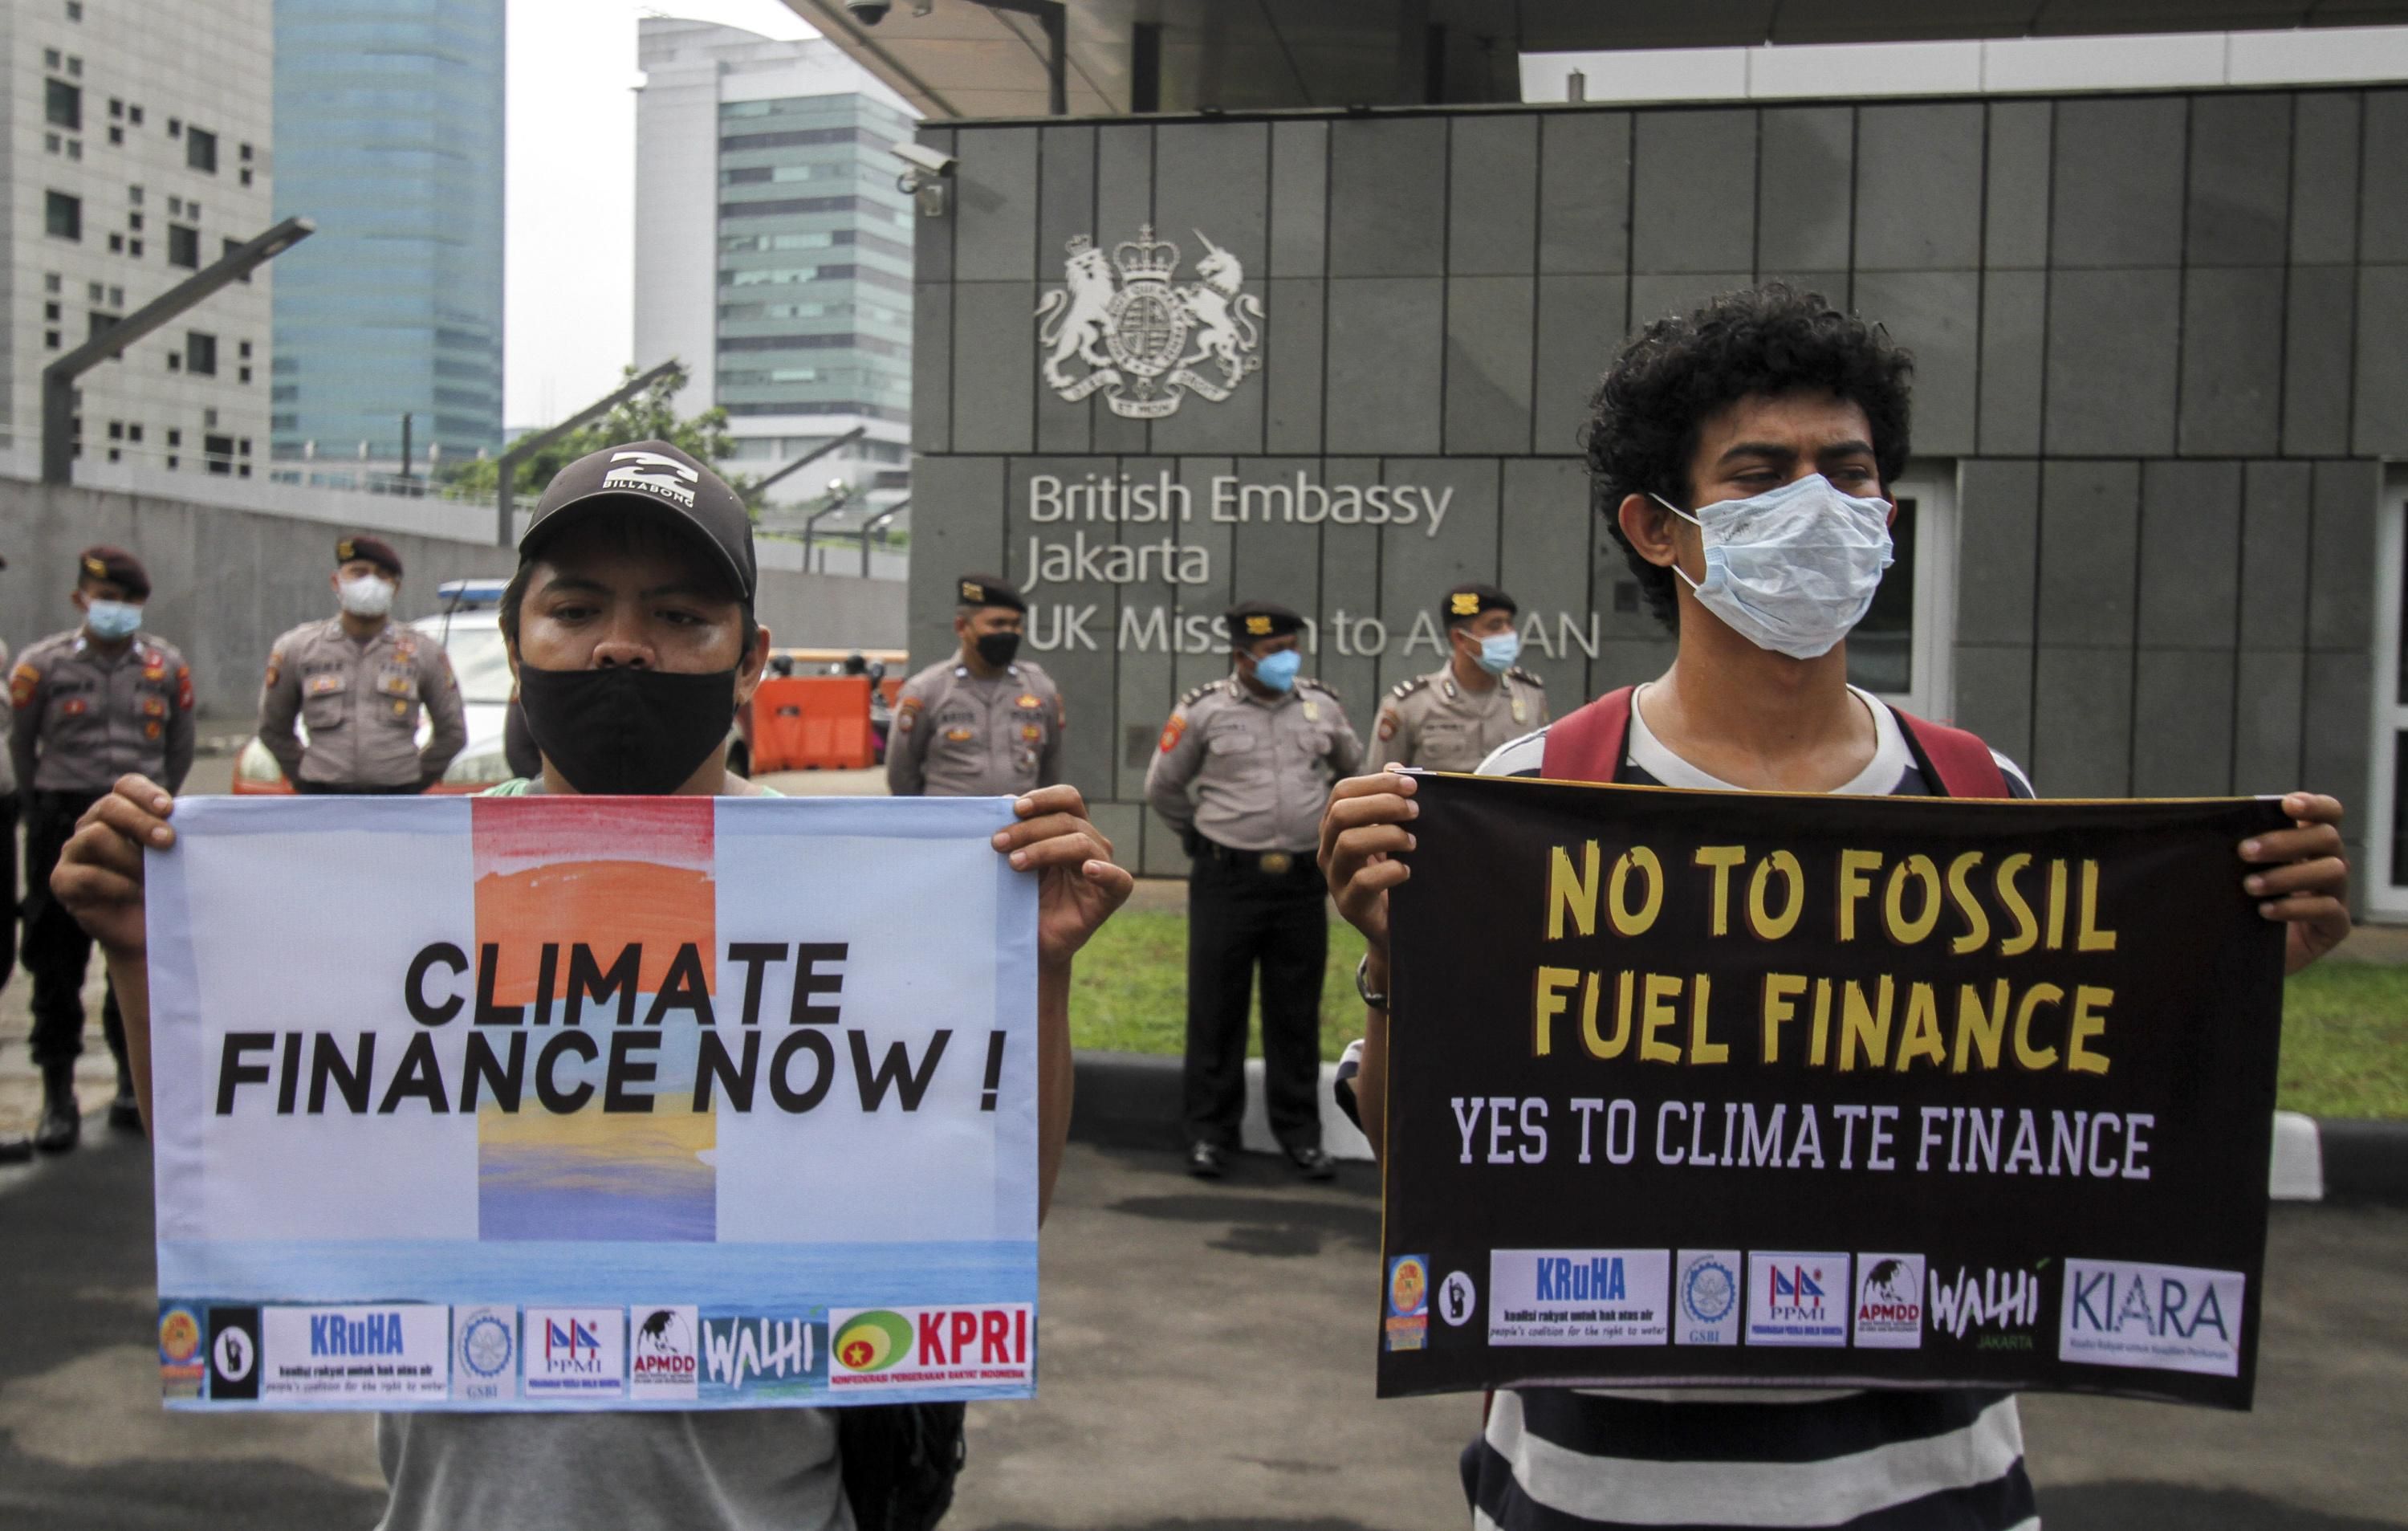 Demonstrators protest fossil fuel funding at the British Embassy in Jakarta.